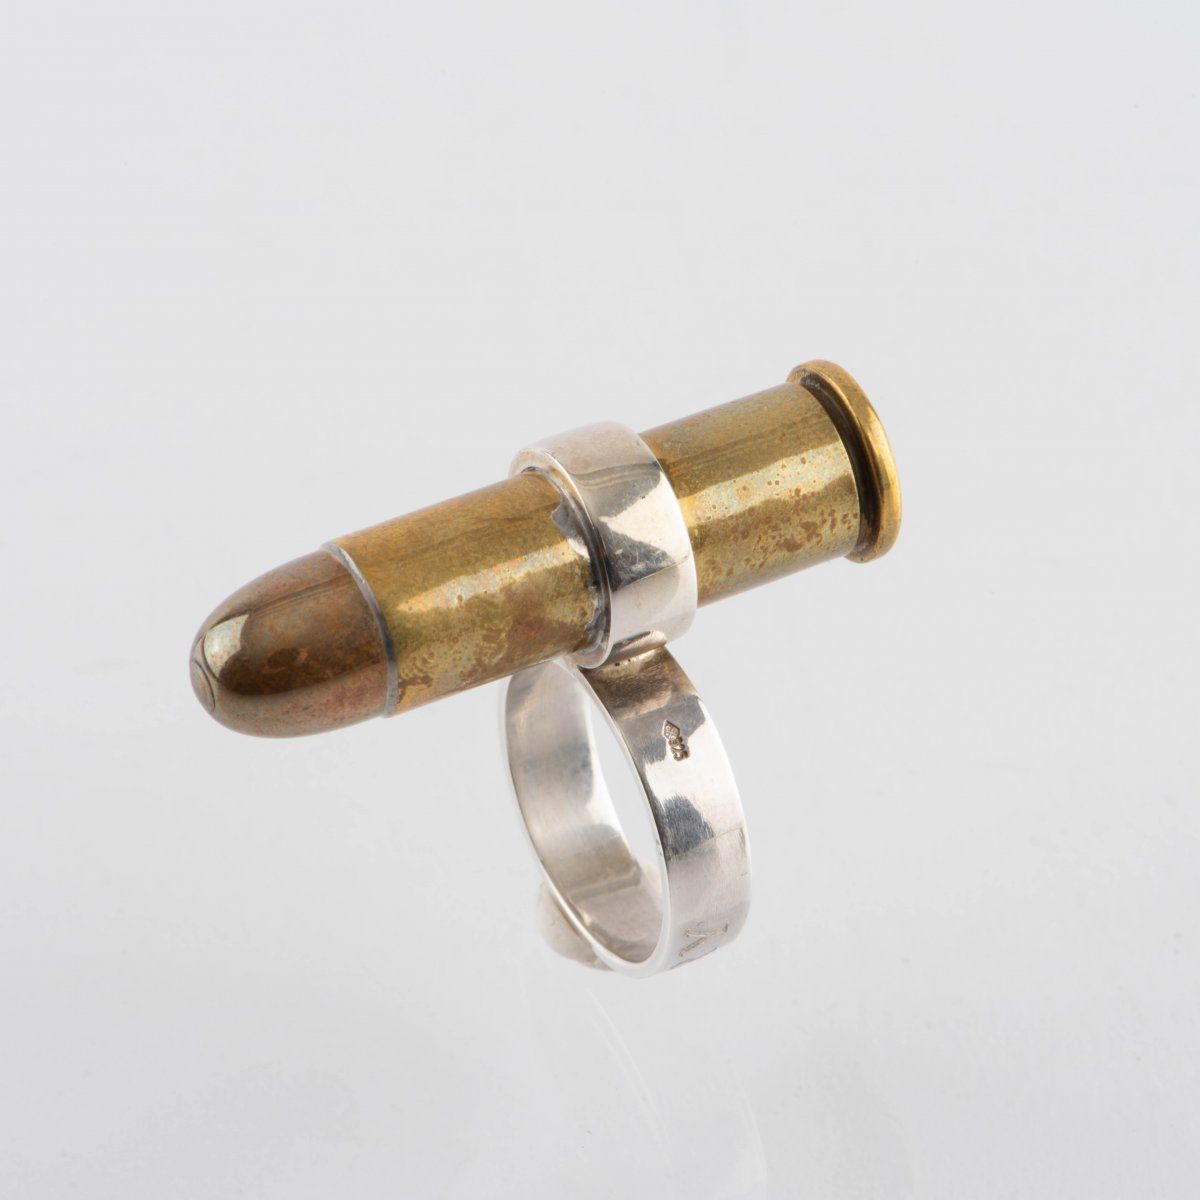 Null Jacques Monory (1924 Paris - 2018 ibid.), Ring 'Bullet', 2009, Sterling sil&hellip;